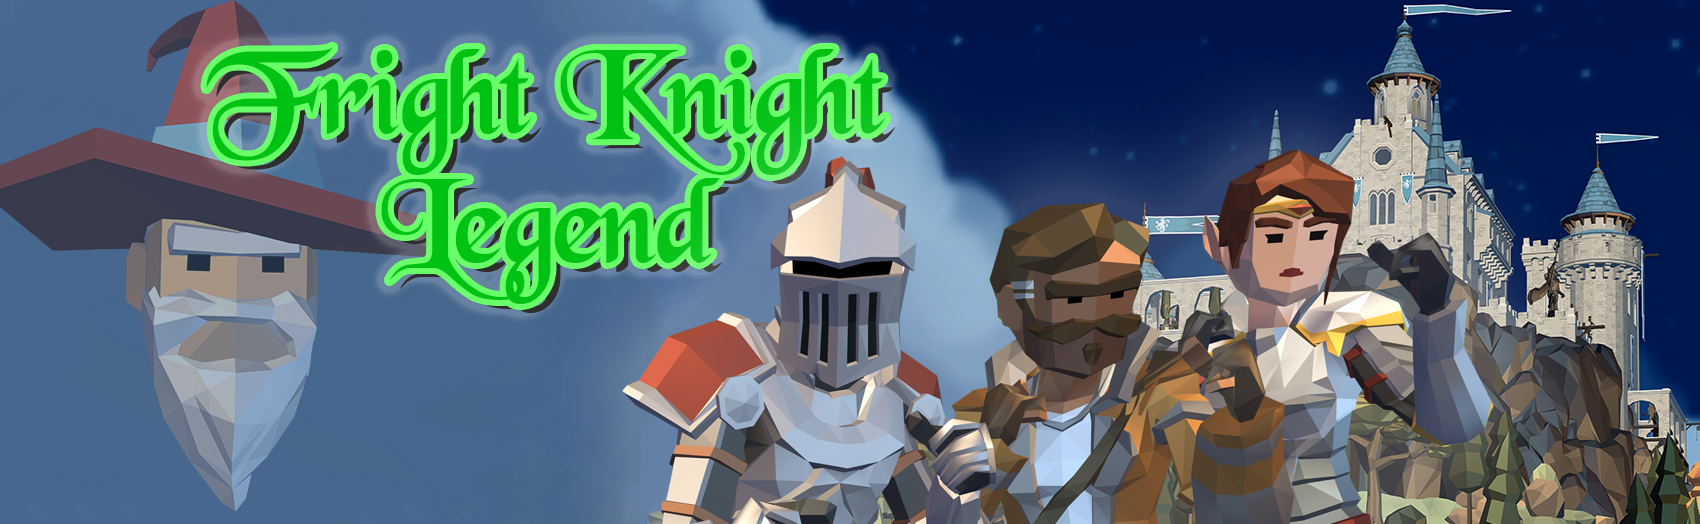 Fright Knight Legend Game Banner Image